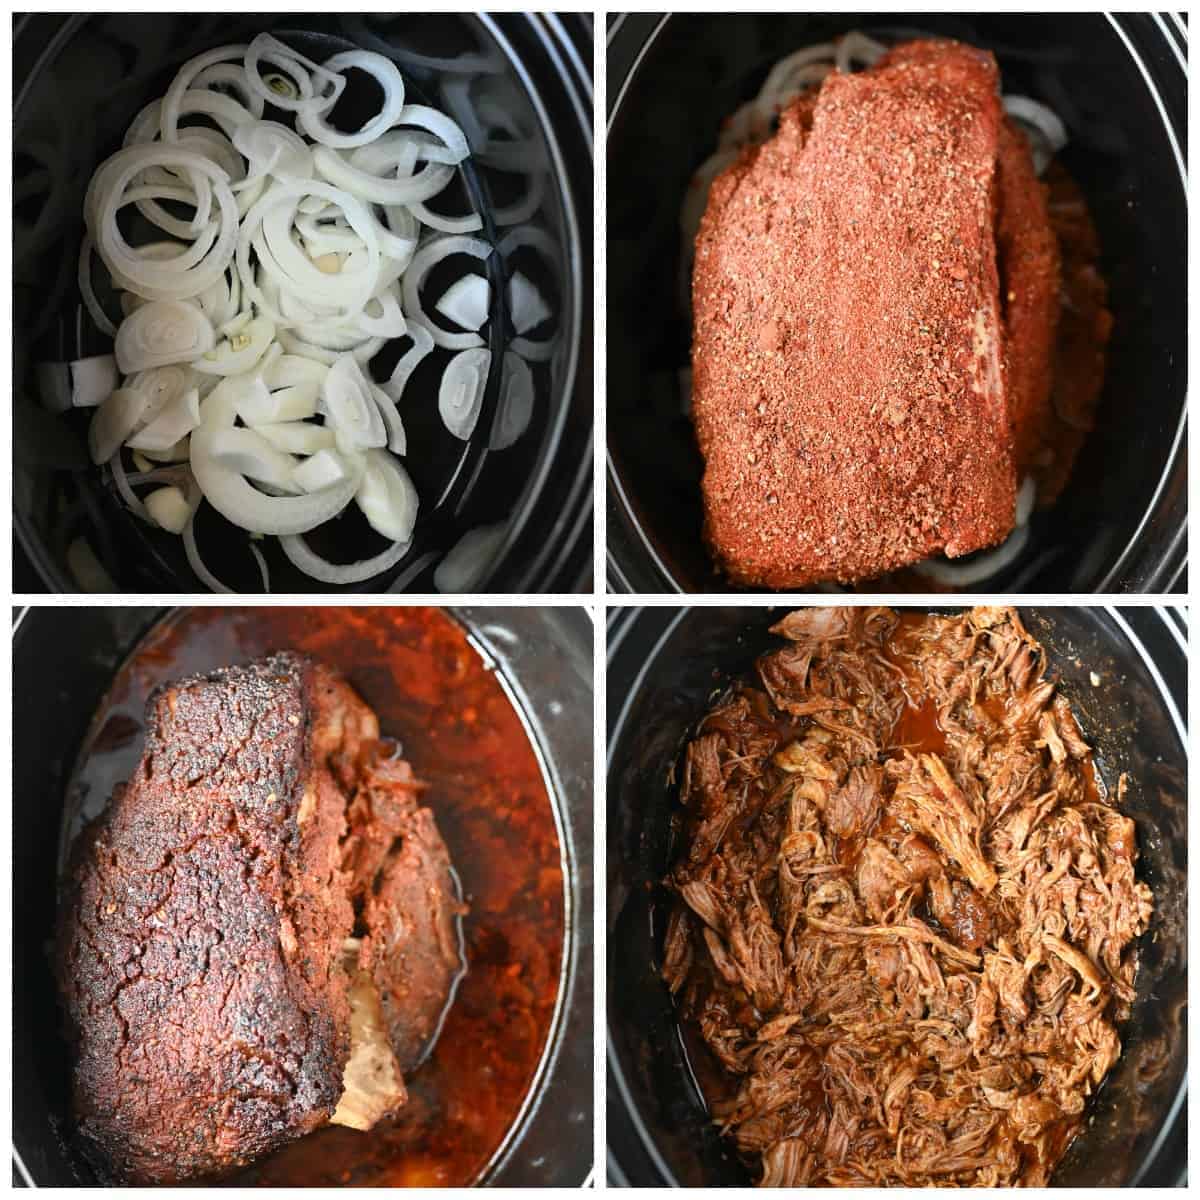 Four how to steps. First one, sliced onions in the bottom of a slow cooker. Step two, spice covered pork butt placed into the slow cooker. Pork butt fully cooked in the slow cooker. Step four, pork butt that has been shredded. 